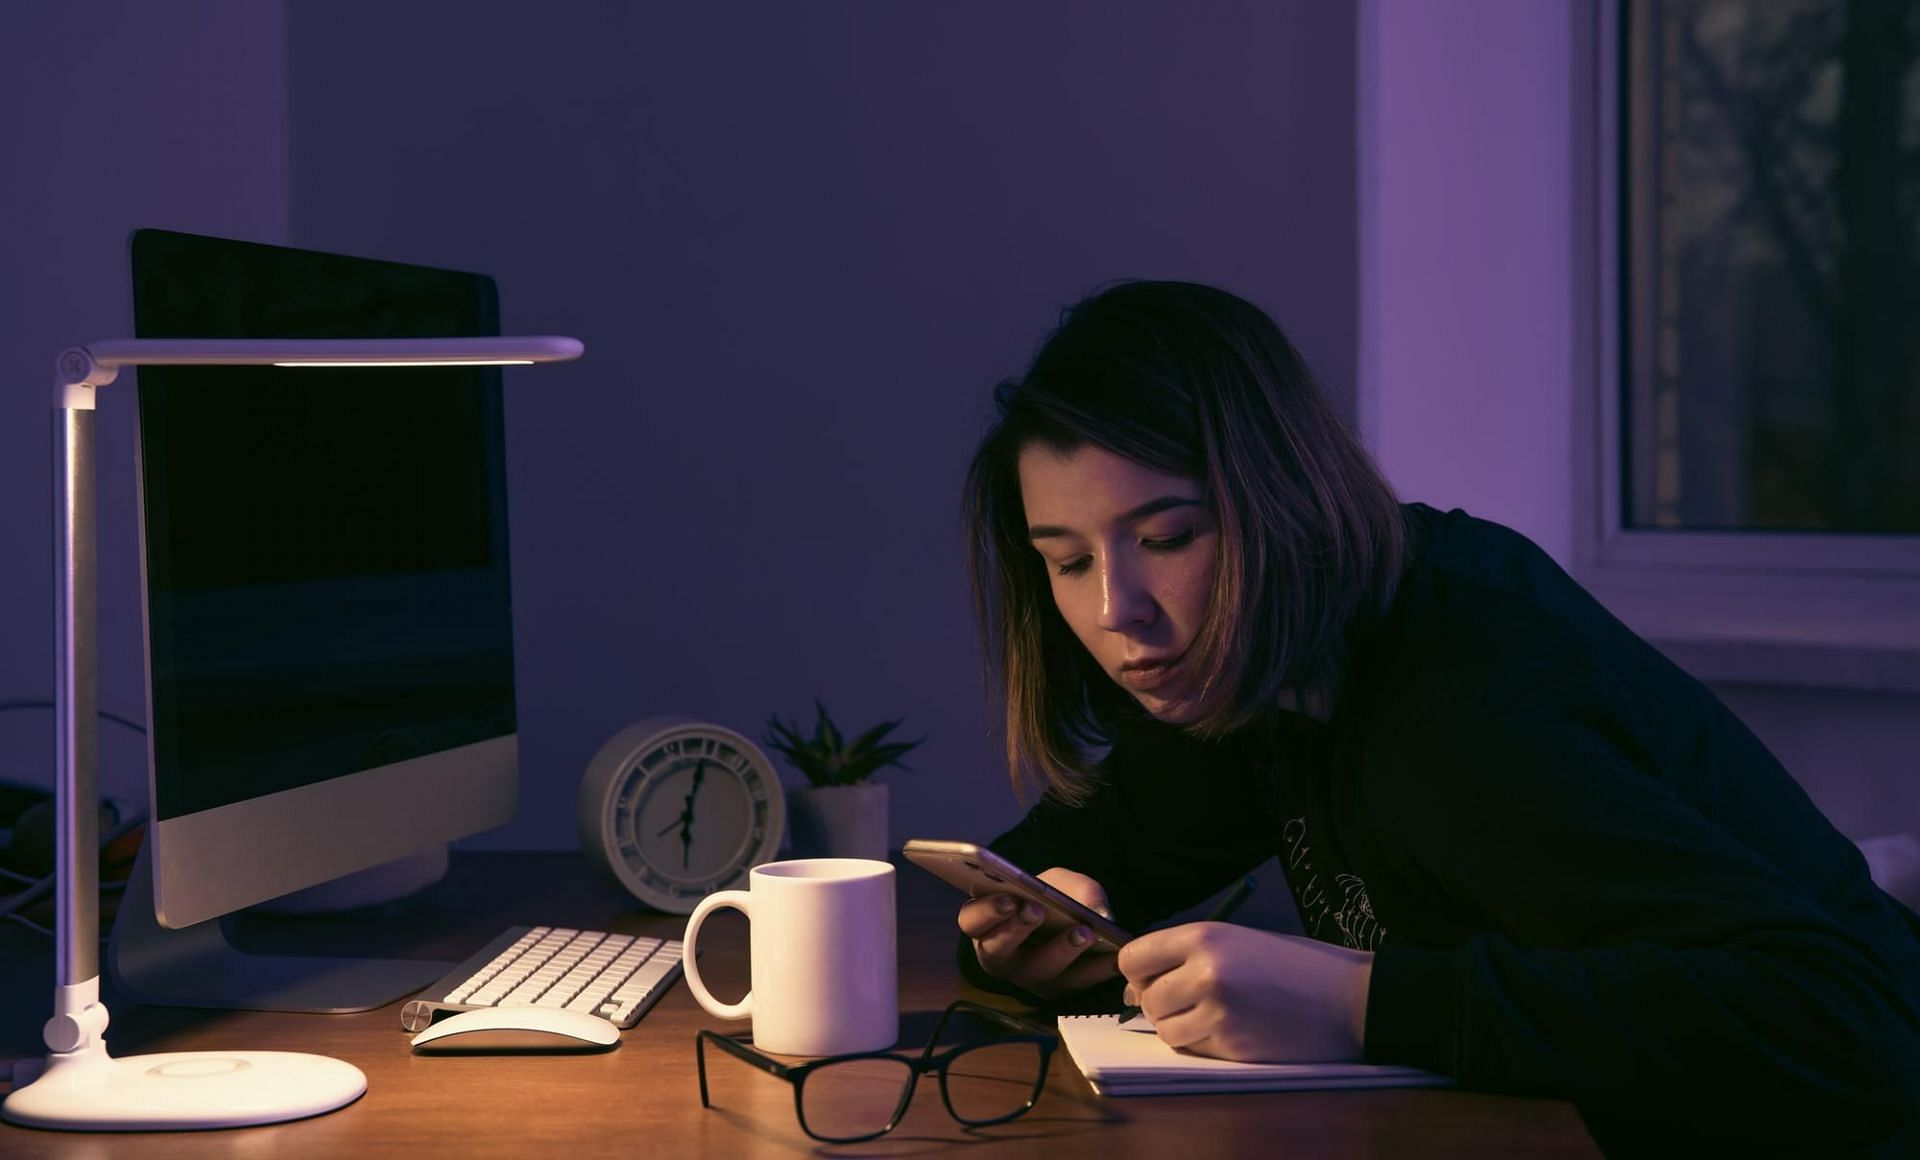 Are all-nighters bad for health? (Image by pvproductions on Freepik)